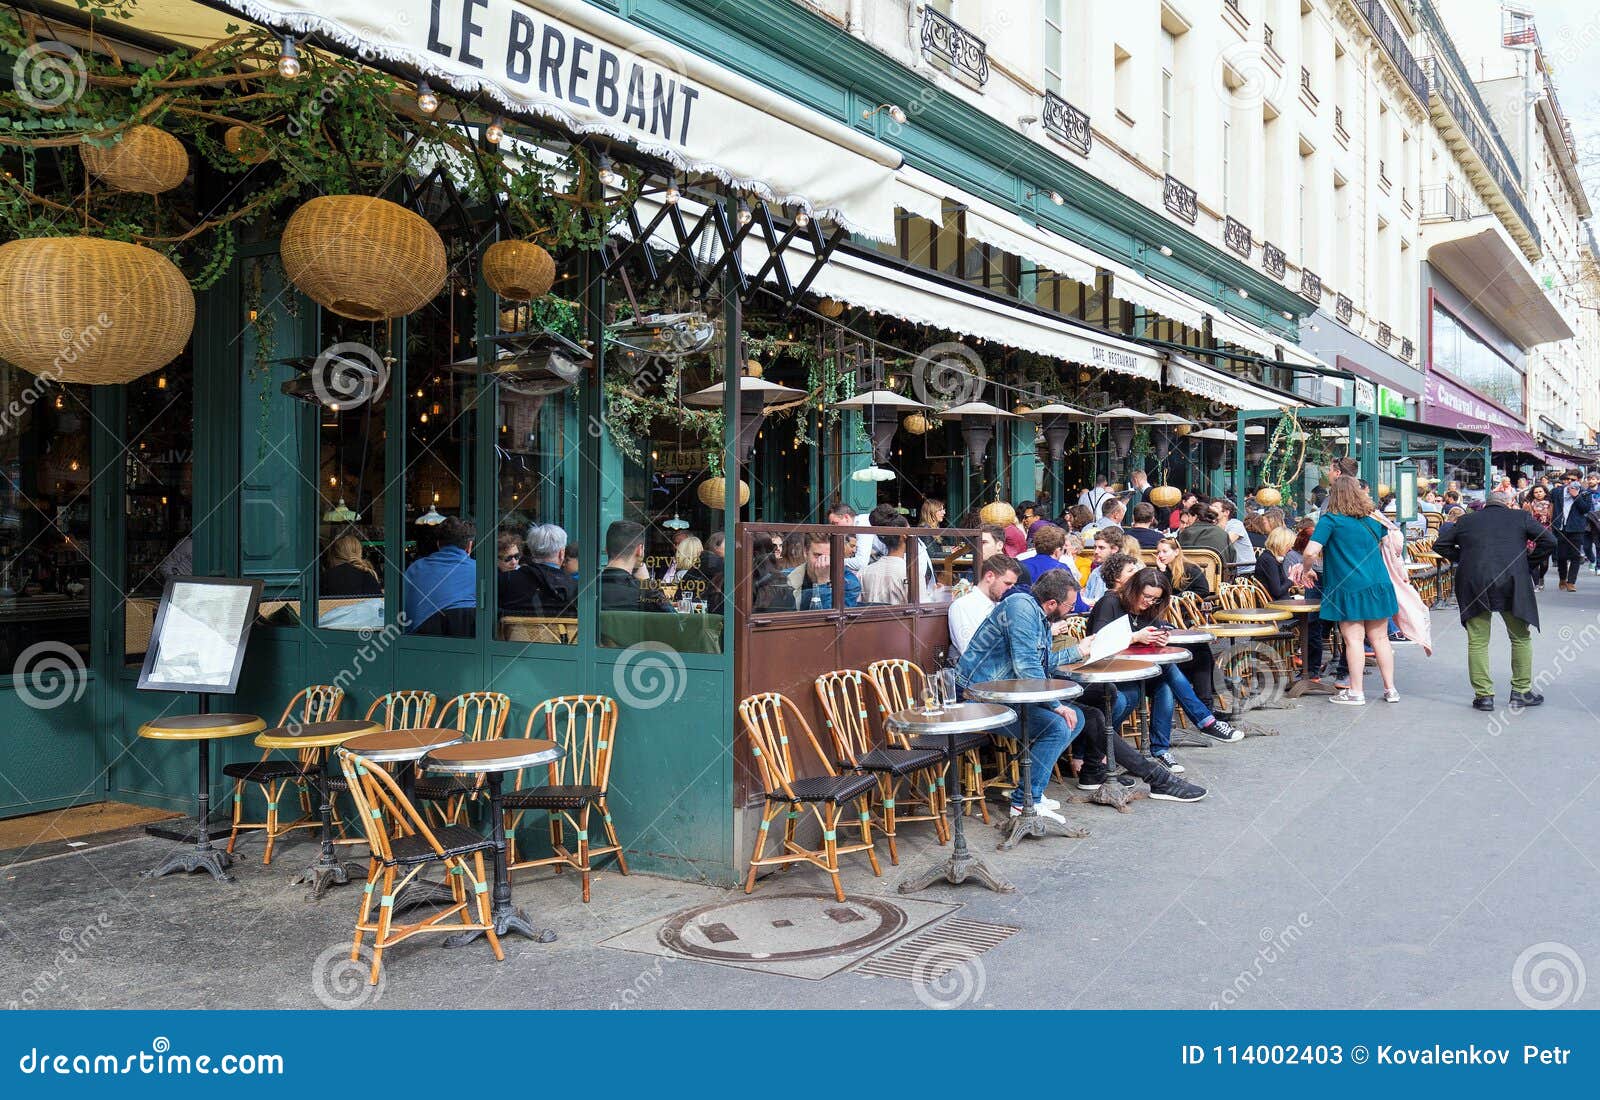 Le Grand Cafe Brebant is the Legendary and Famous Brasserie Located on ...